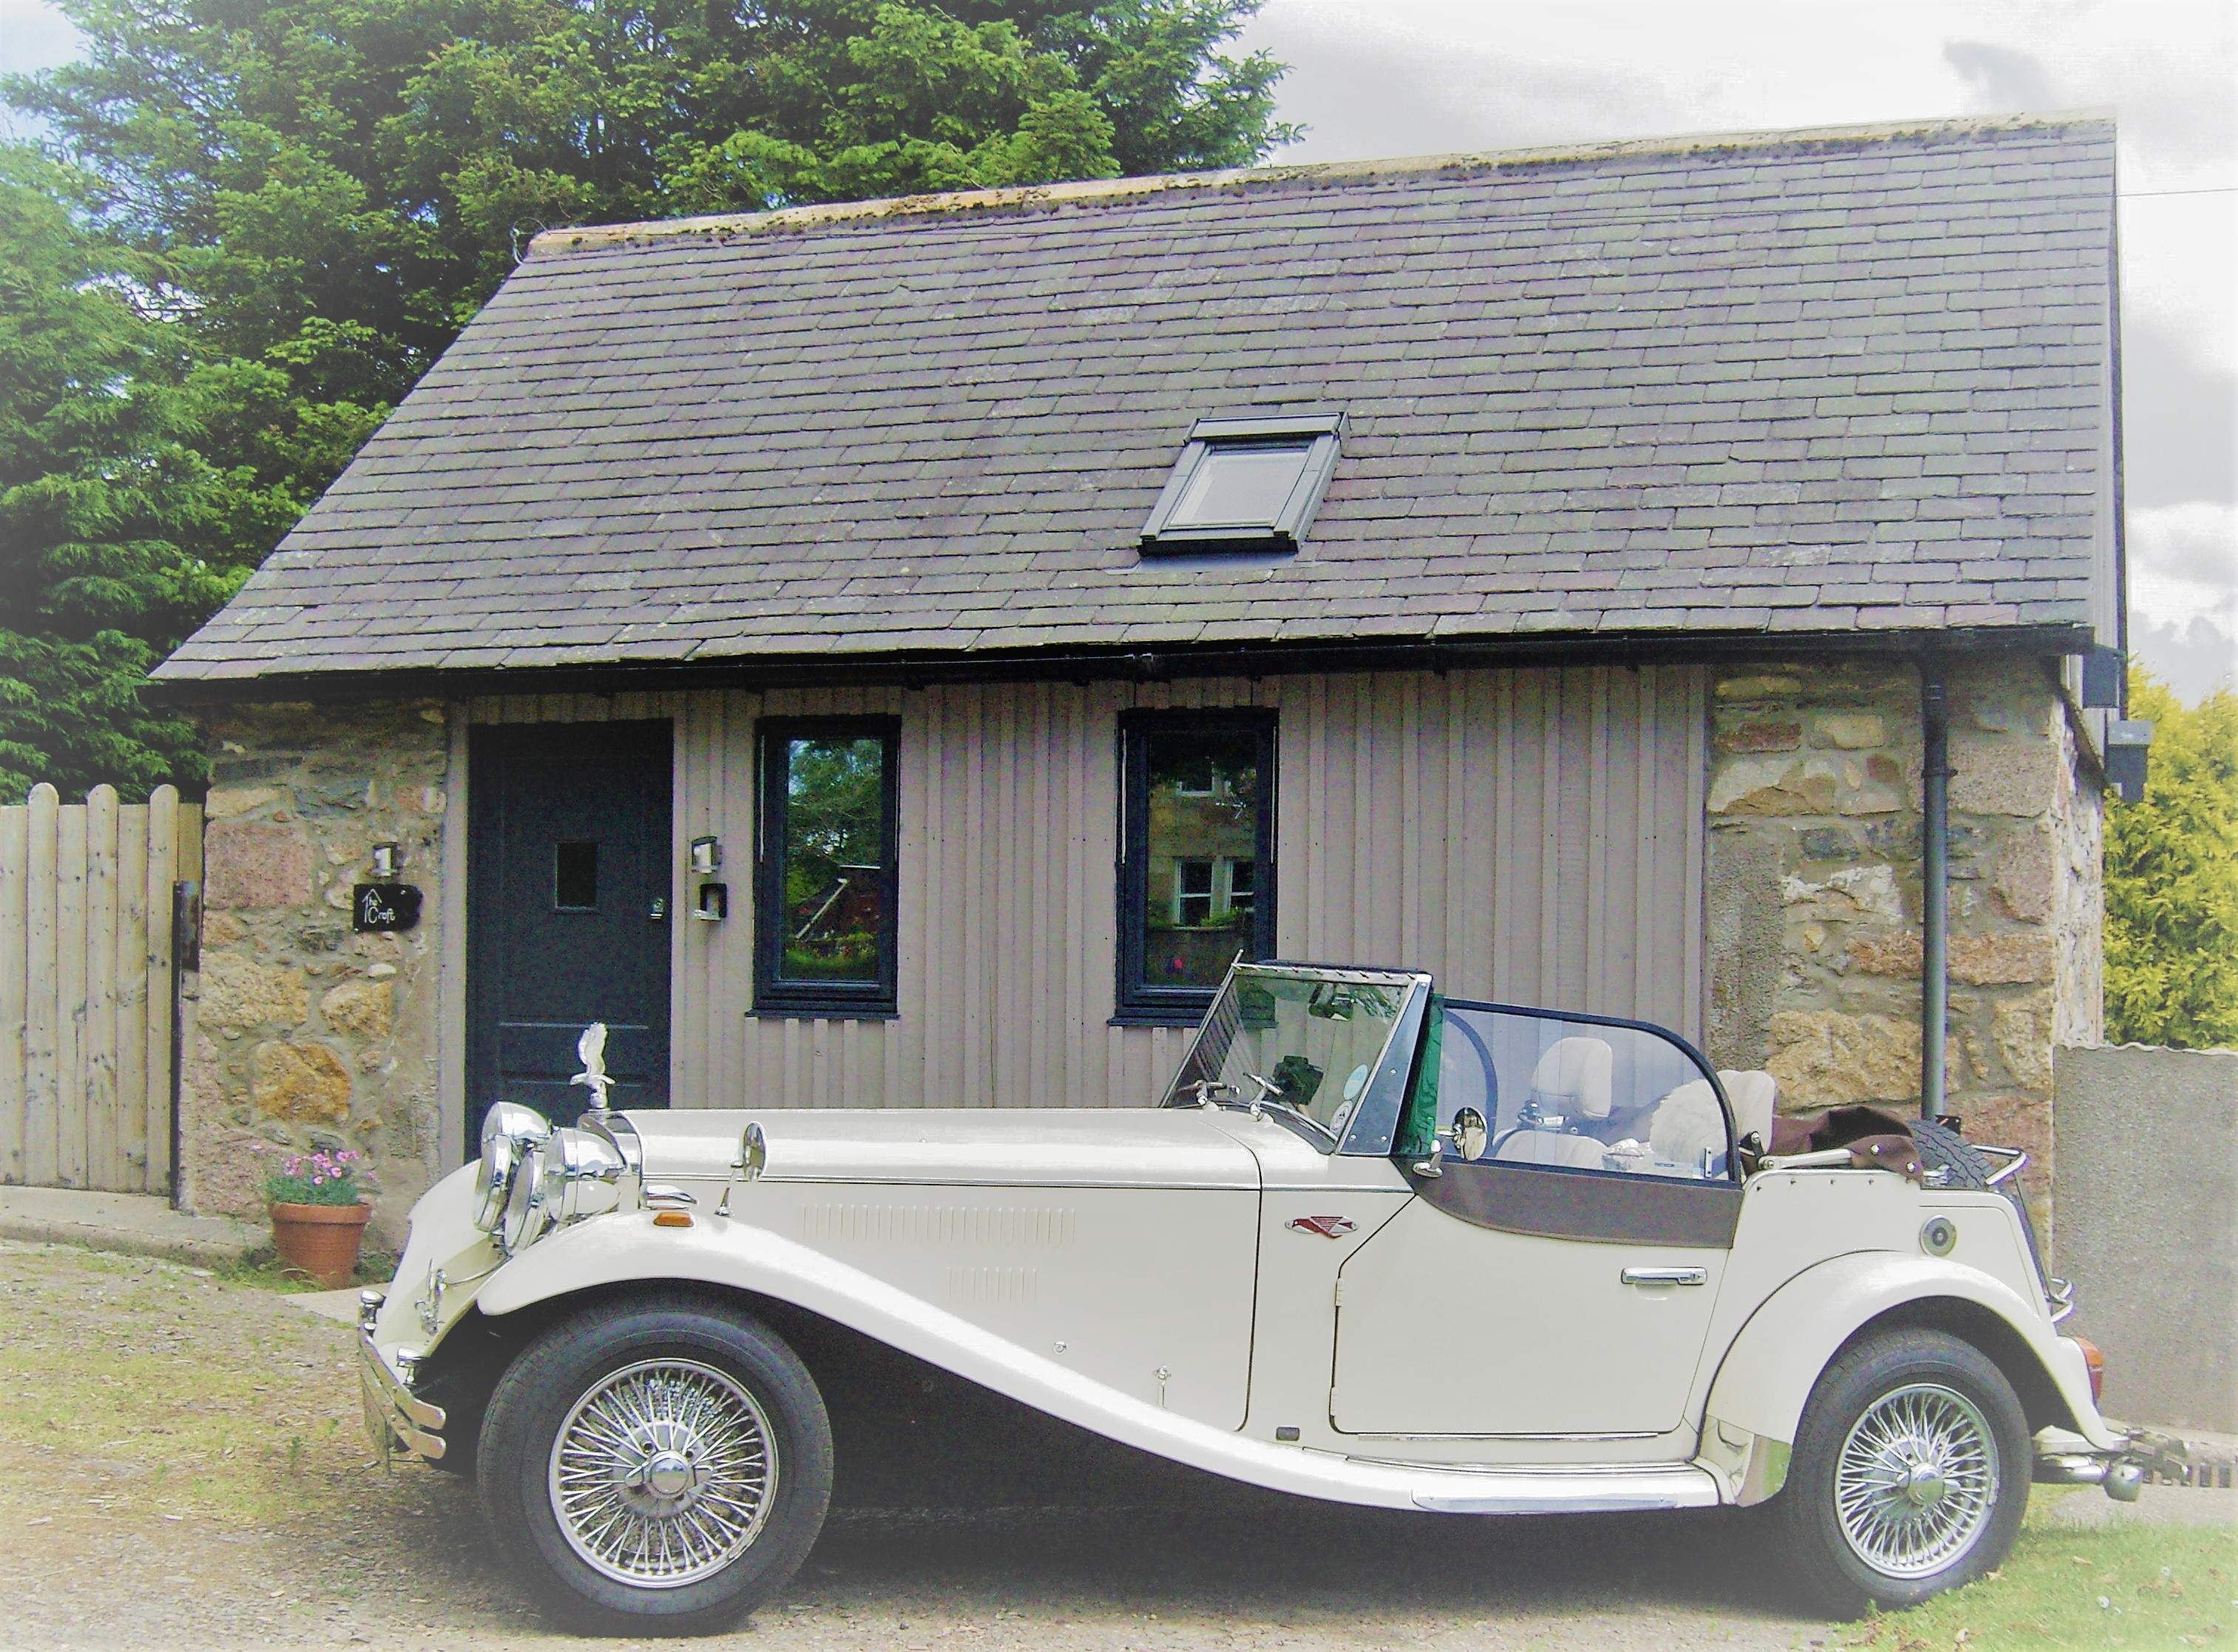 The Croft with the beautiful Falcon parked outside - Courtesy of Ron & Gail